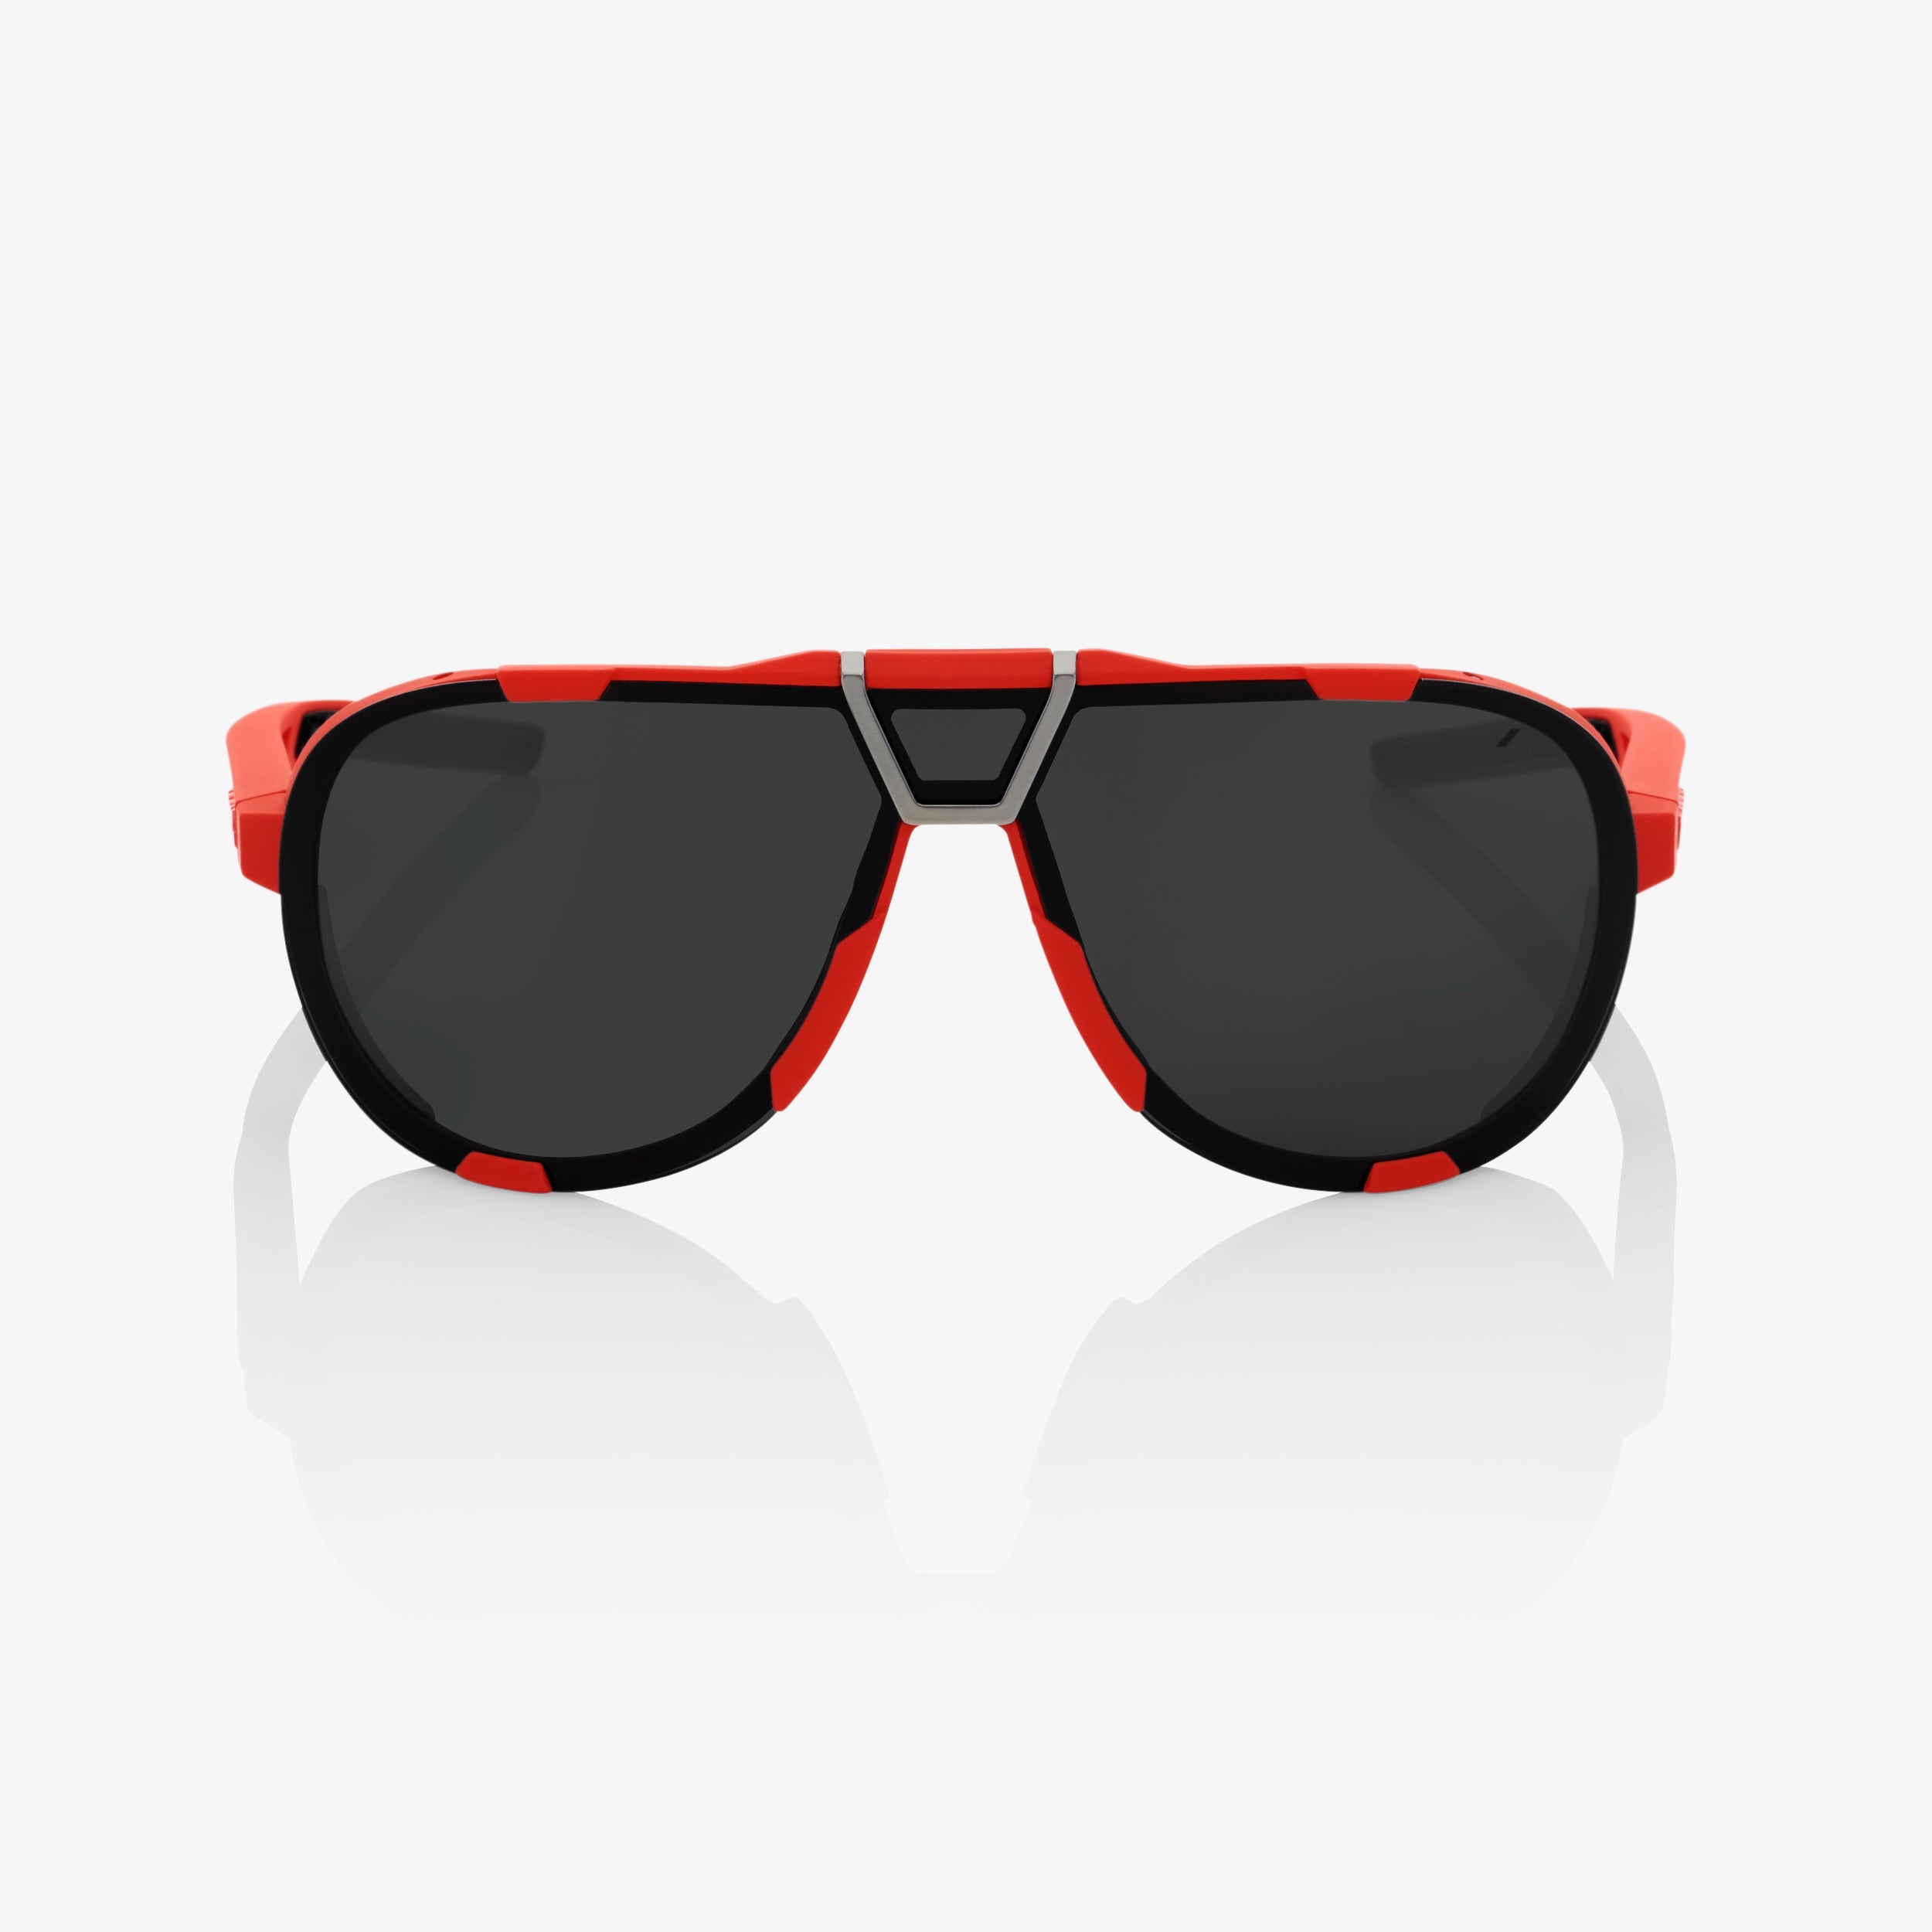 WESTCRAFT Soft Tact Red Black Mirror Lens